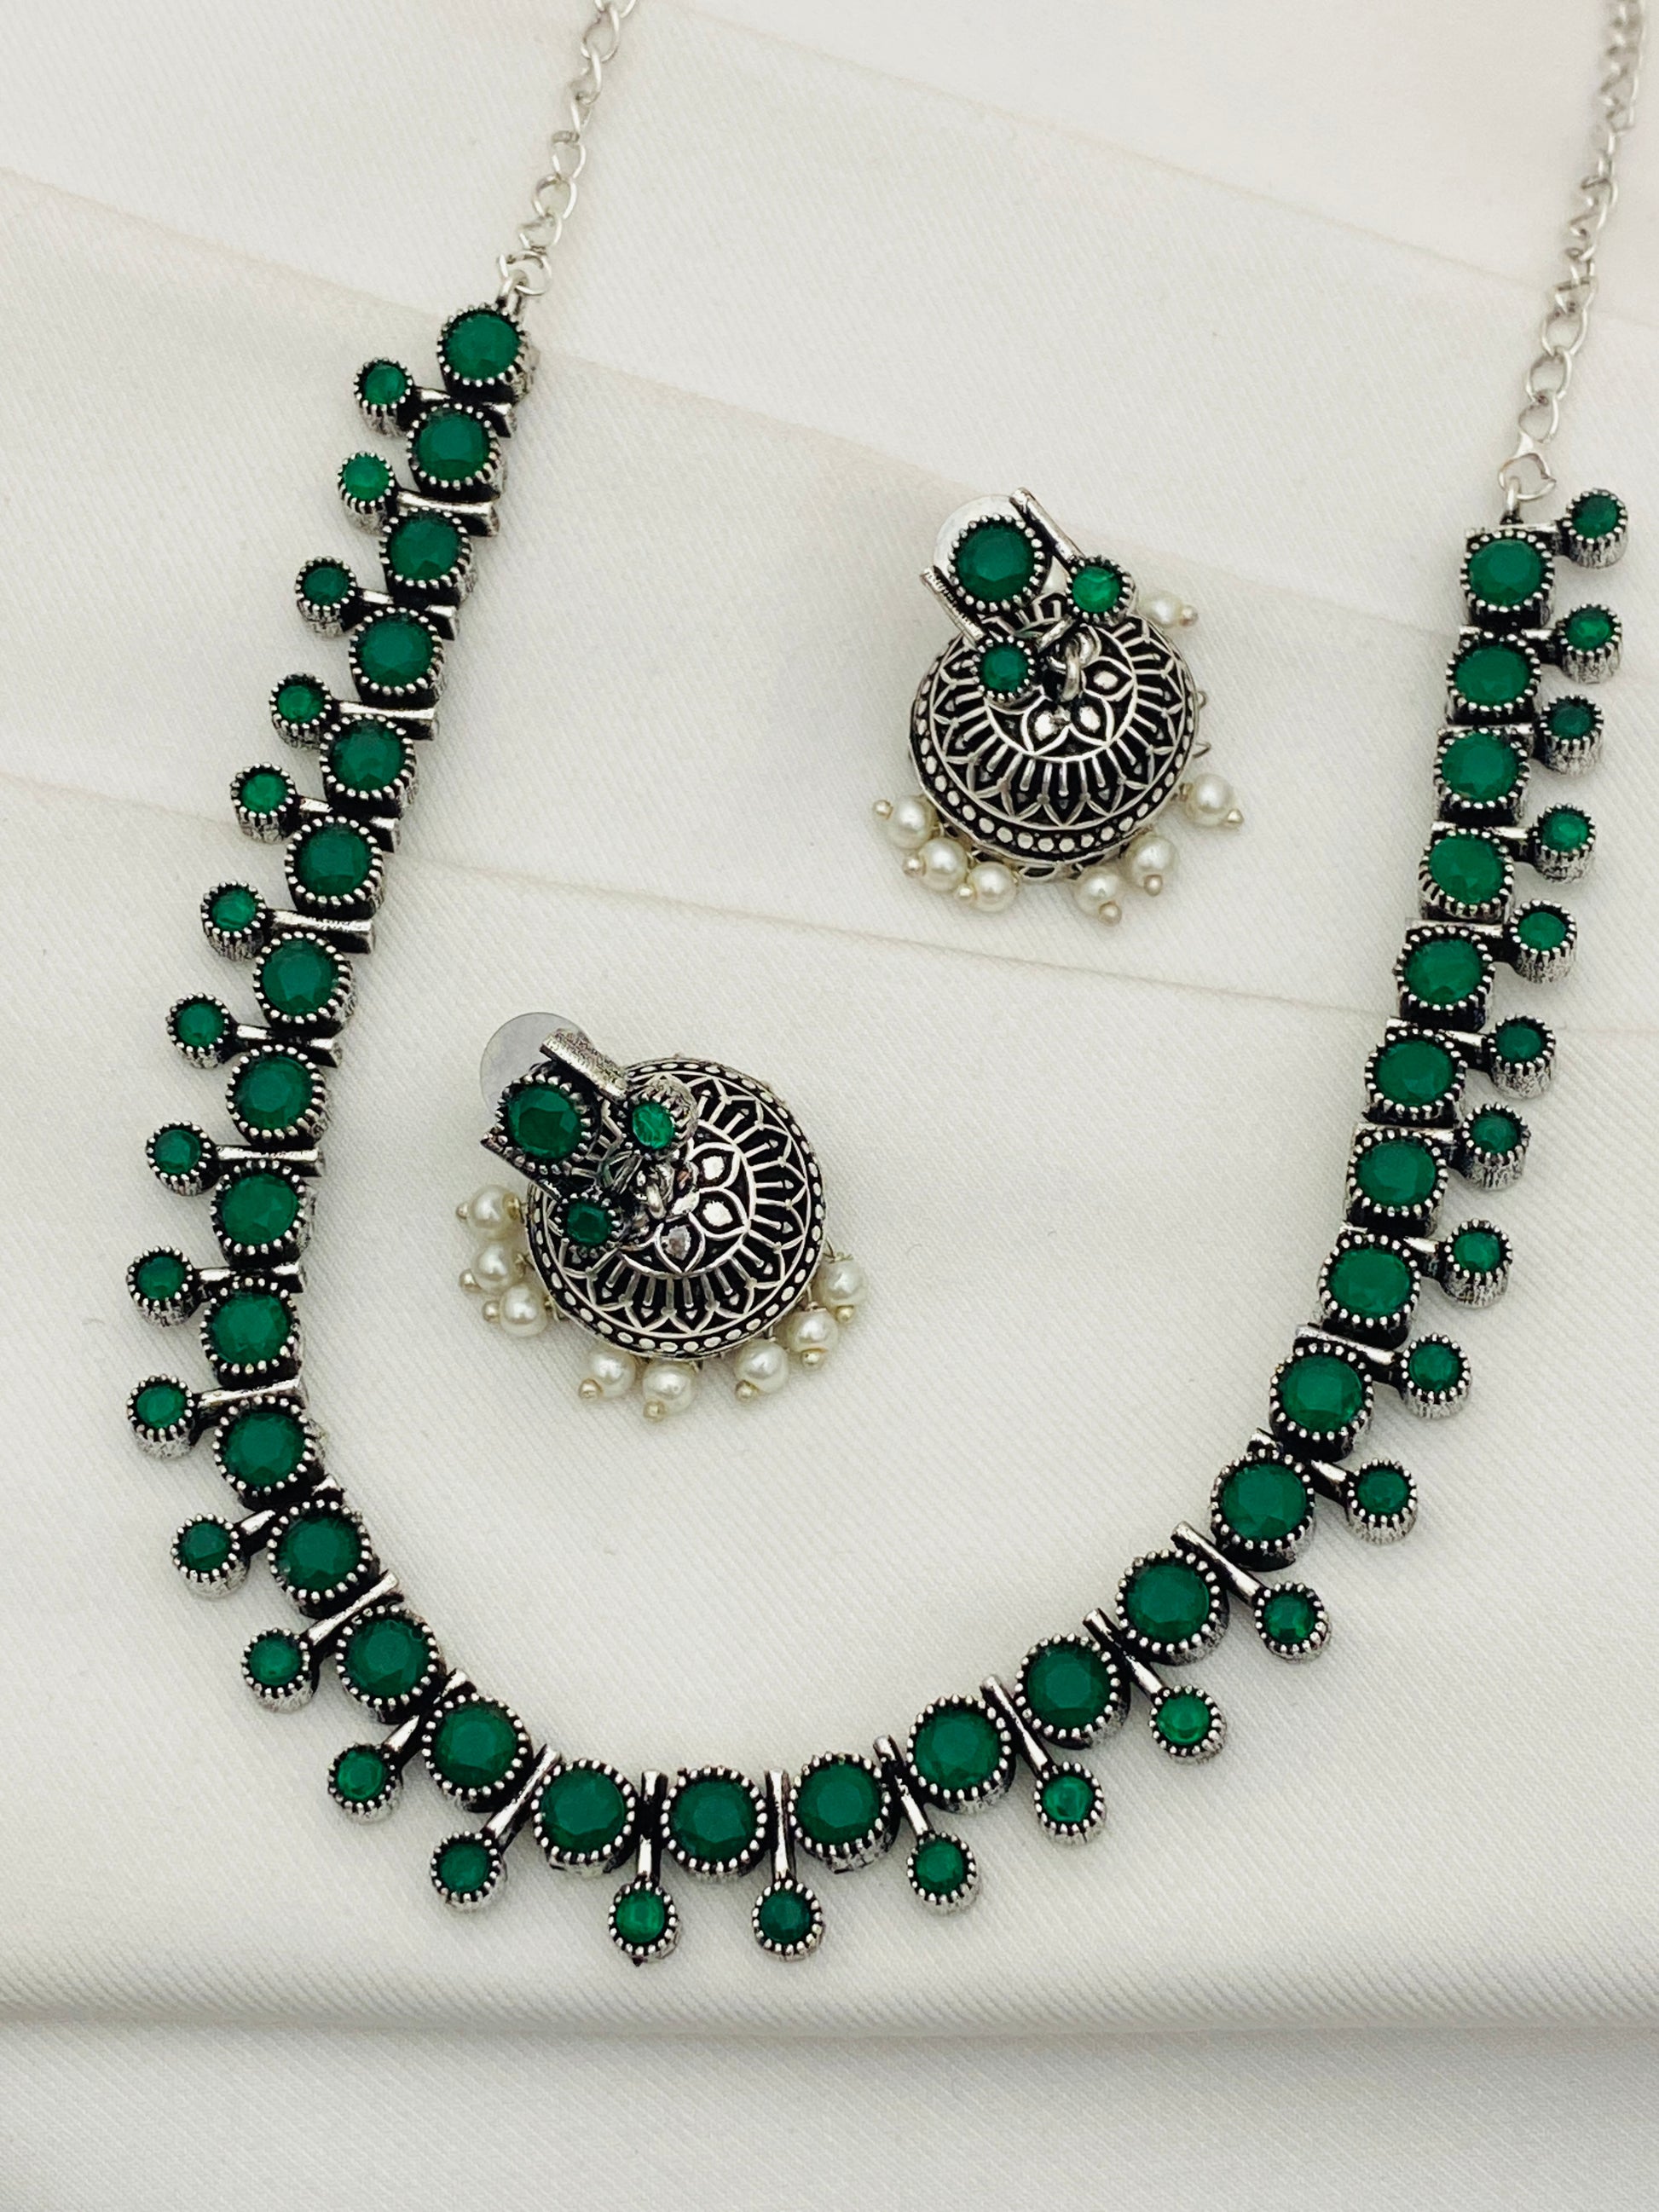 Designer Silver Plated Oxidized Necklace Set With Jhumka Earrings in Yuma